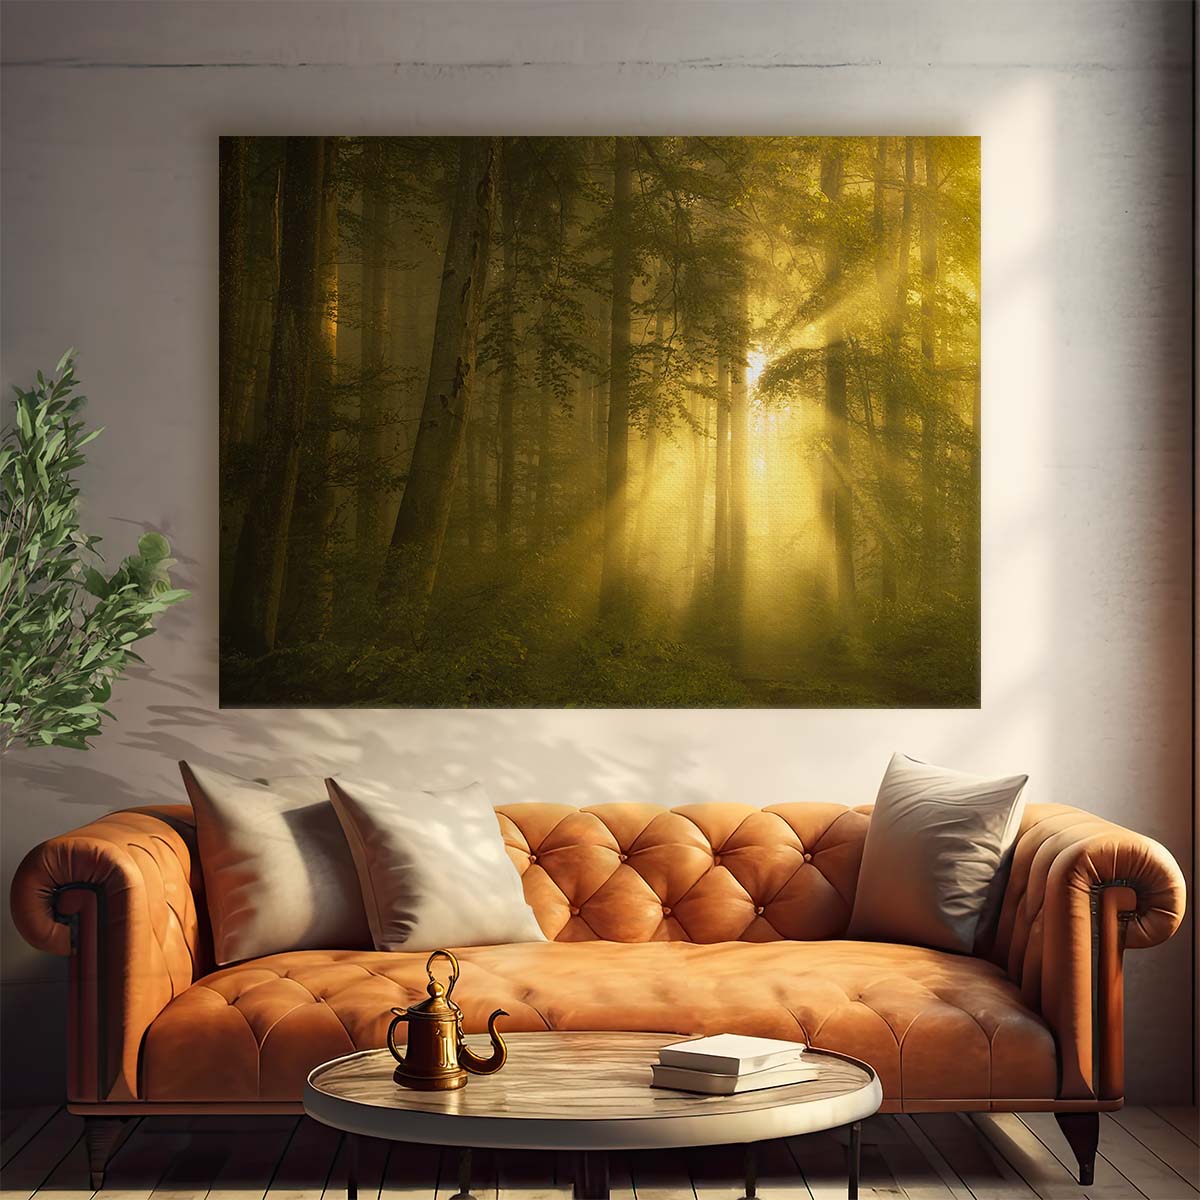 Sunrise Misty Forest Rays Landscape Wall Art by Luxuriance Designs. Made in USA.